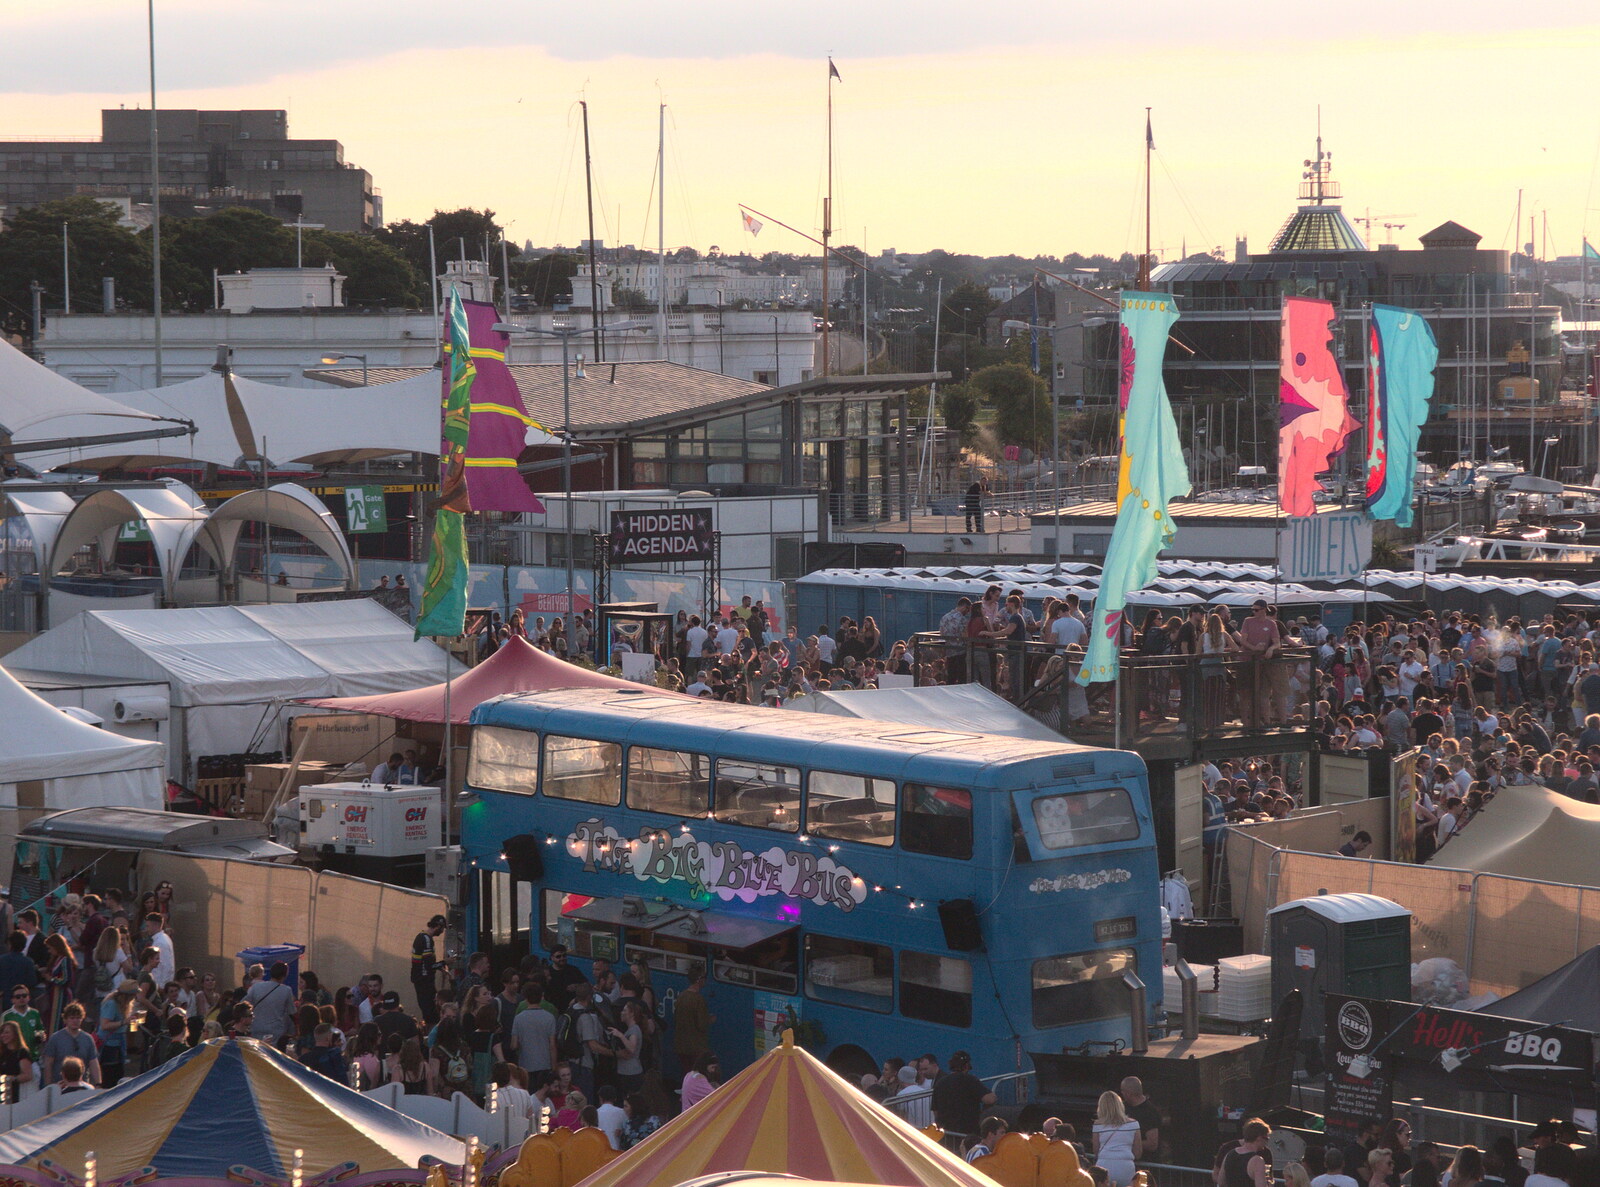 Another festival view from Beatyard Festival, Dún Laoghaire, County Dublin, Ireland - 5th August 2018